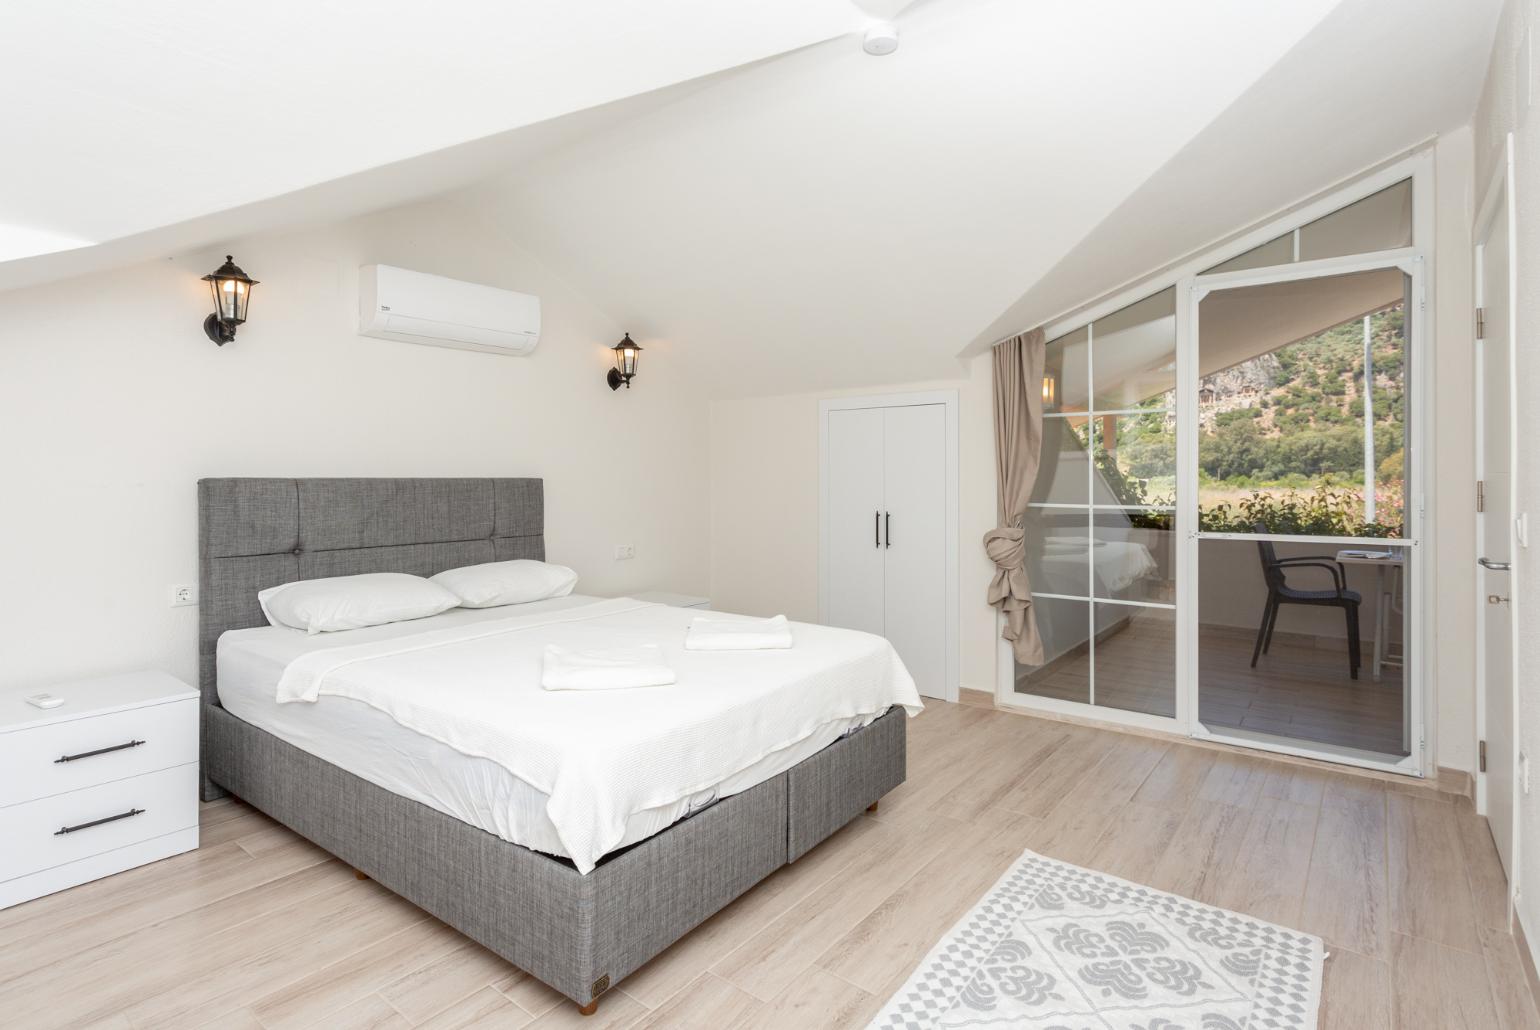 Double bedroom with A/C and upper terrace access